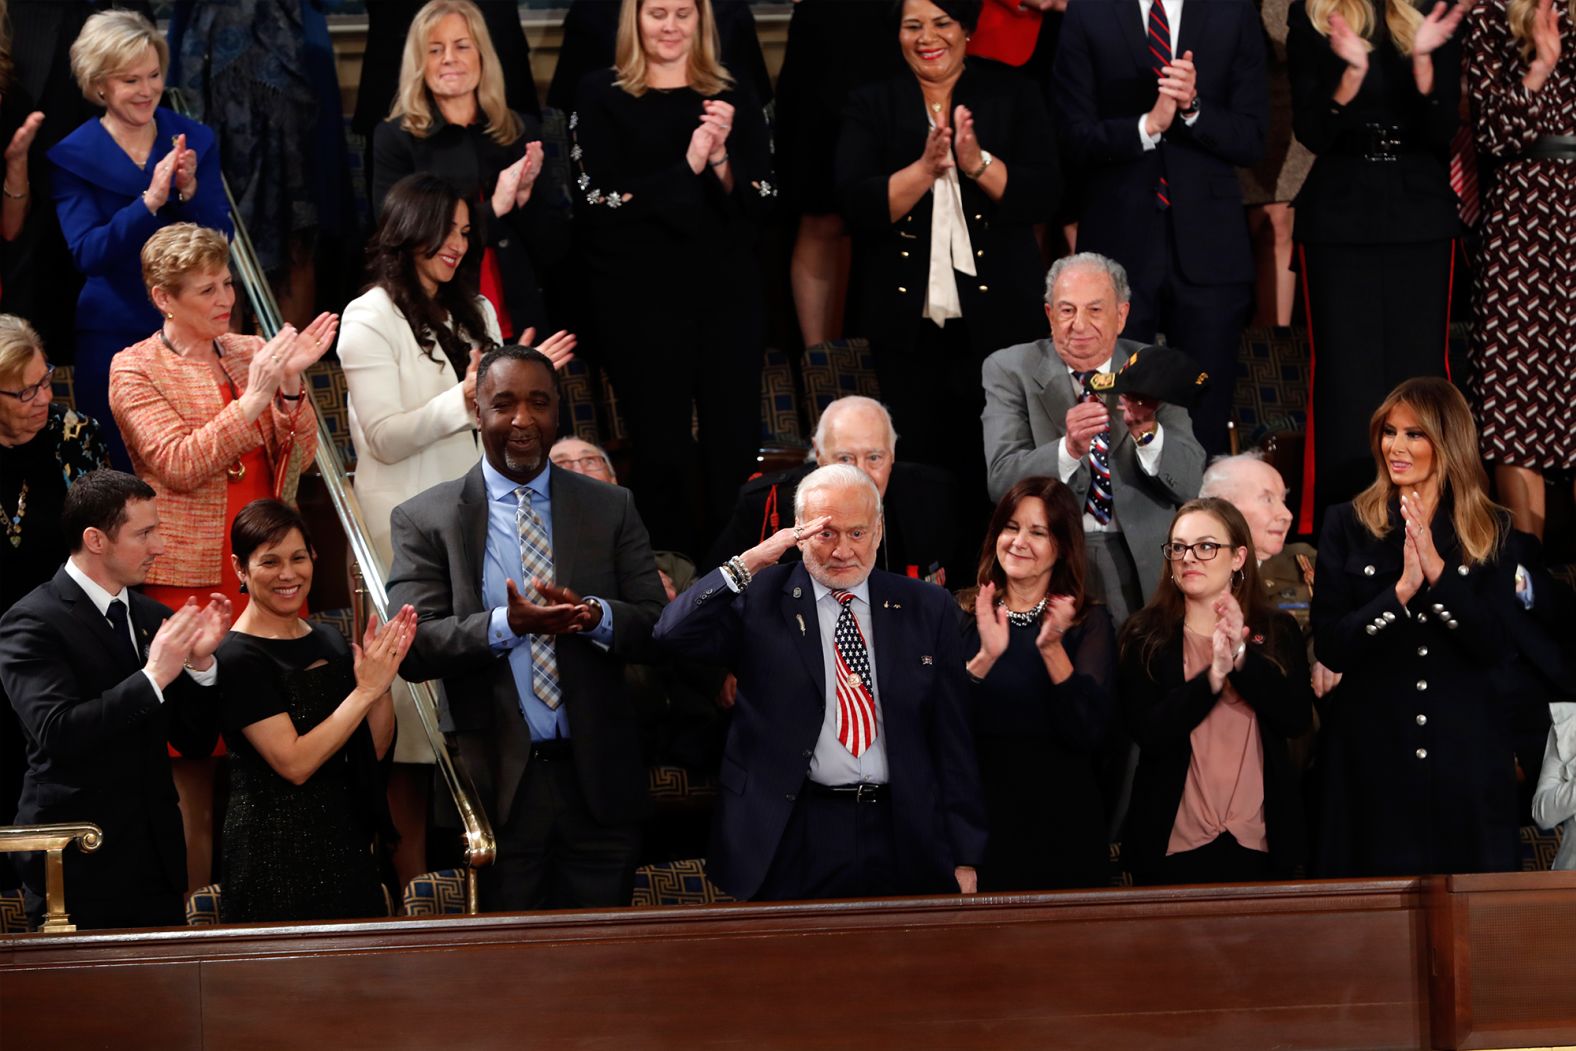 Former NASA astronaut Buzz Aldrin salutes as he is recognized by Trump during his speech. Trump <a href="index.php?page=&url=https%3A%2F%2Fwww.cnn.com%2Fpolitics%2Flive-news%2Fstate-of-the-union-2019%2Fh_e84fe9f712a6fbefa0481f5ba85b5ee4" target="_blank">thanked the Apollo 11 astronaut</a> before saying, "This year, American astronauts will go back to space on American rockets."